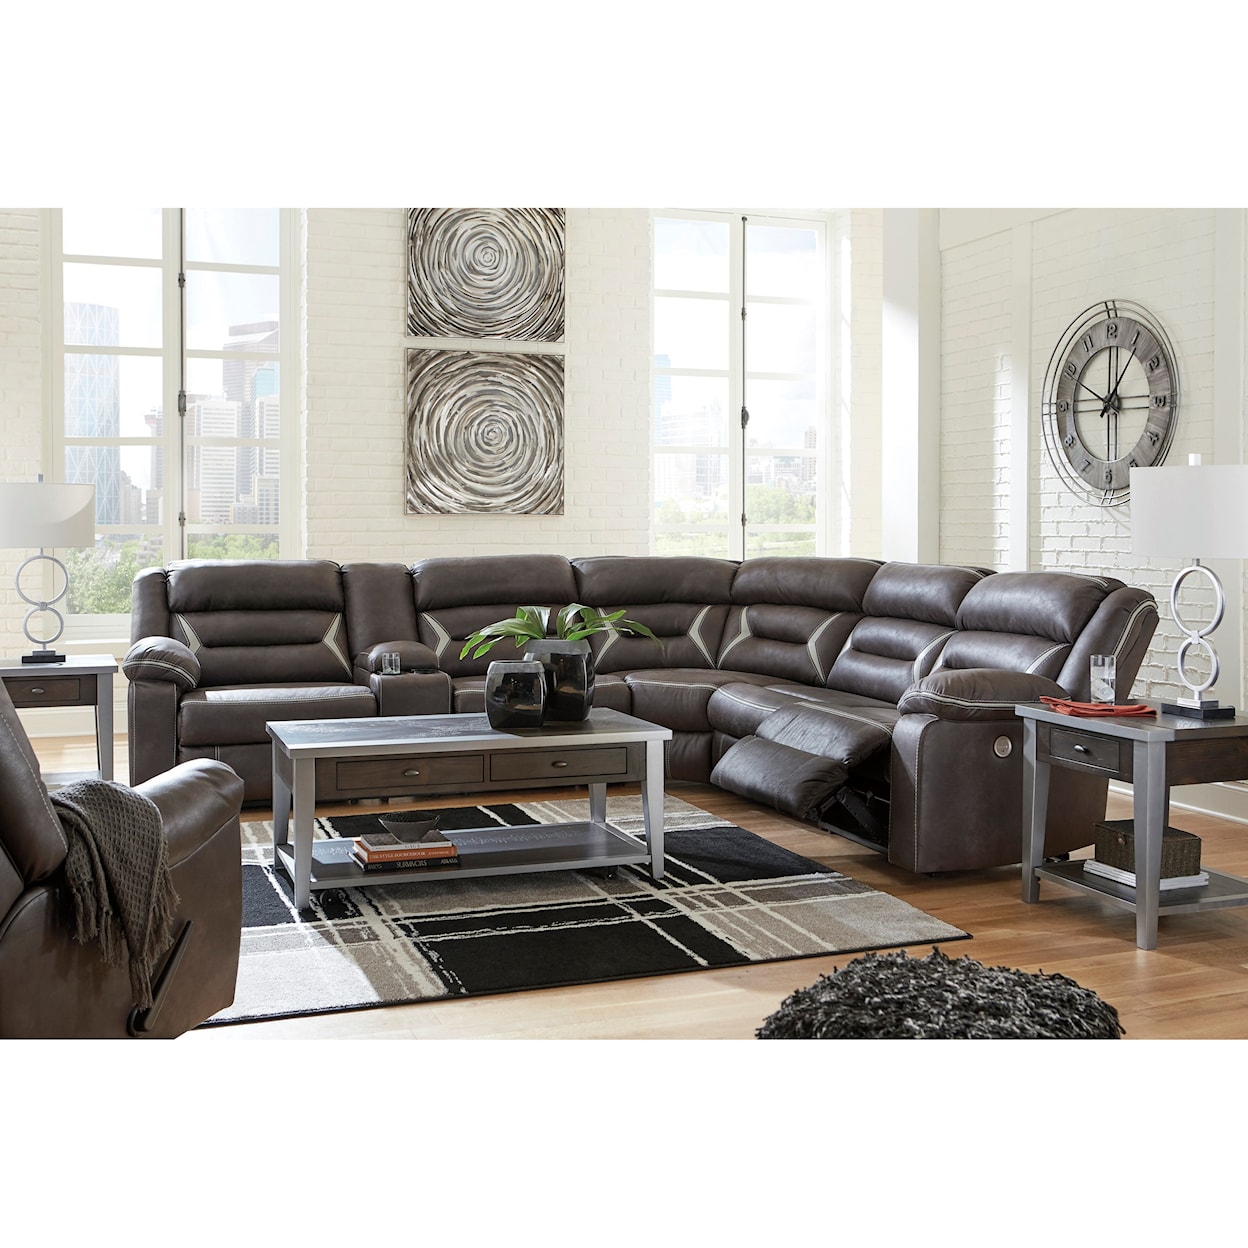 Signature Design by Ashley Kincord Power Reclining Living Room Group